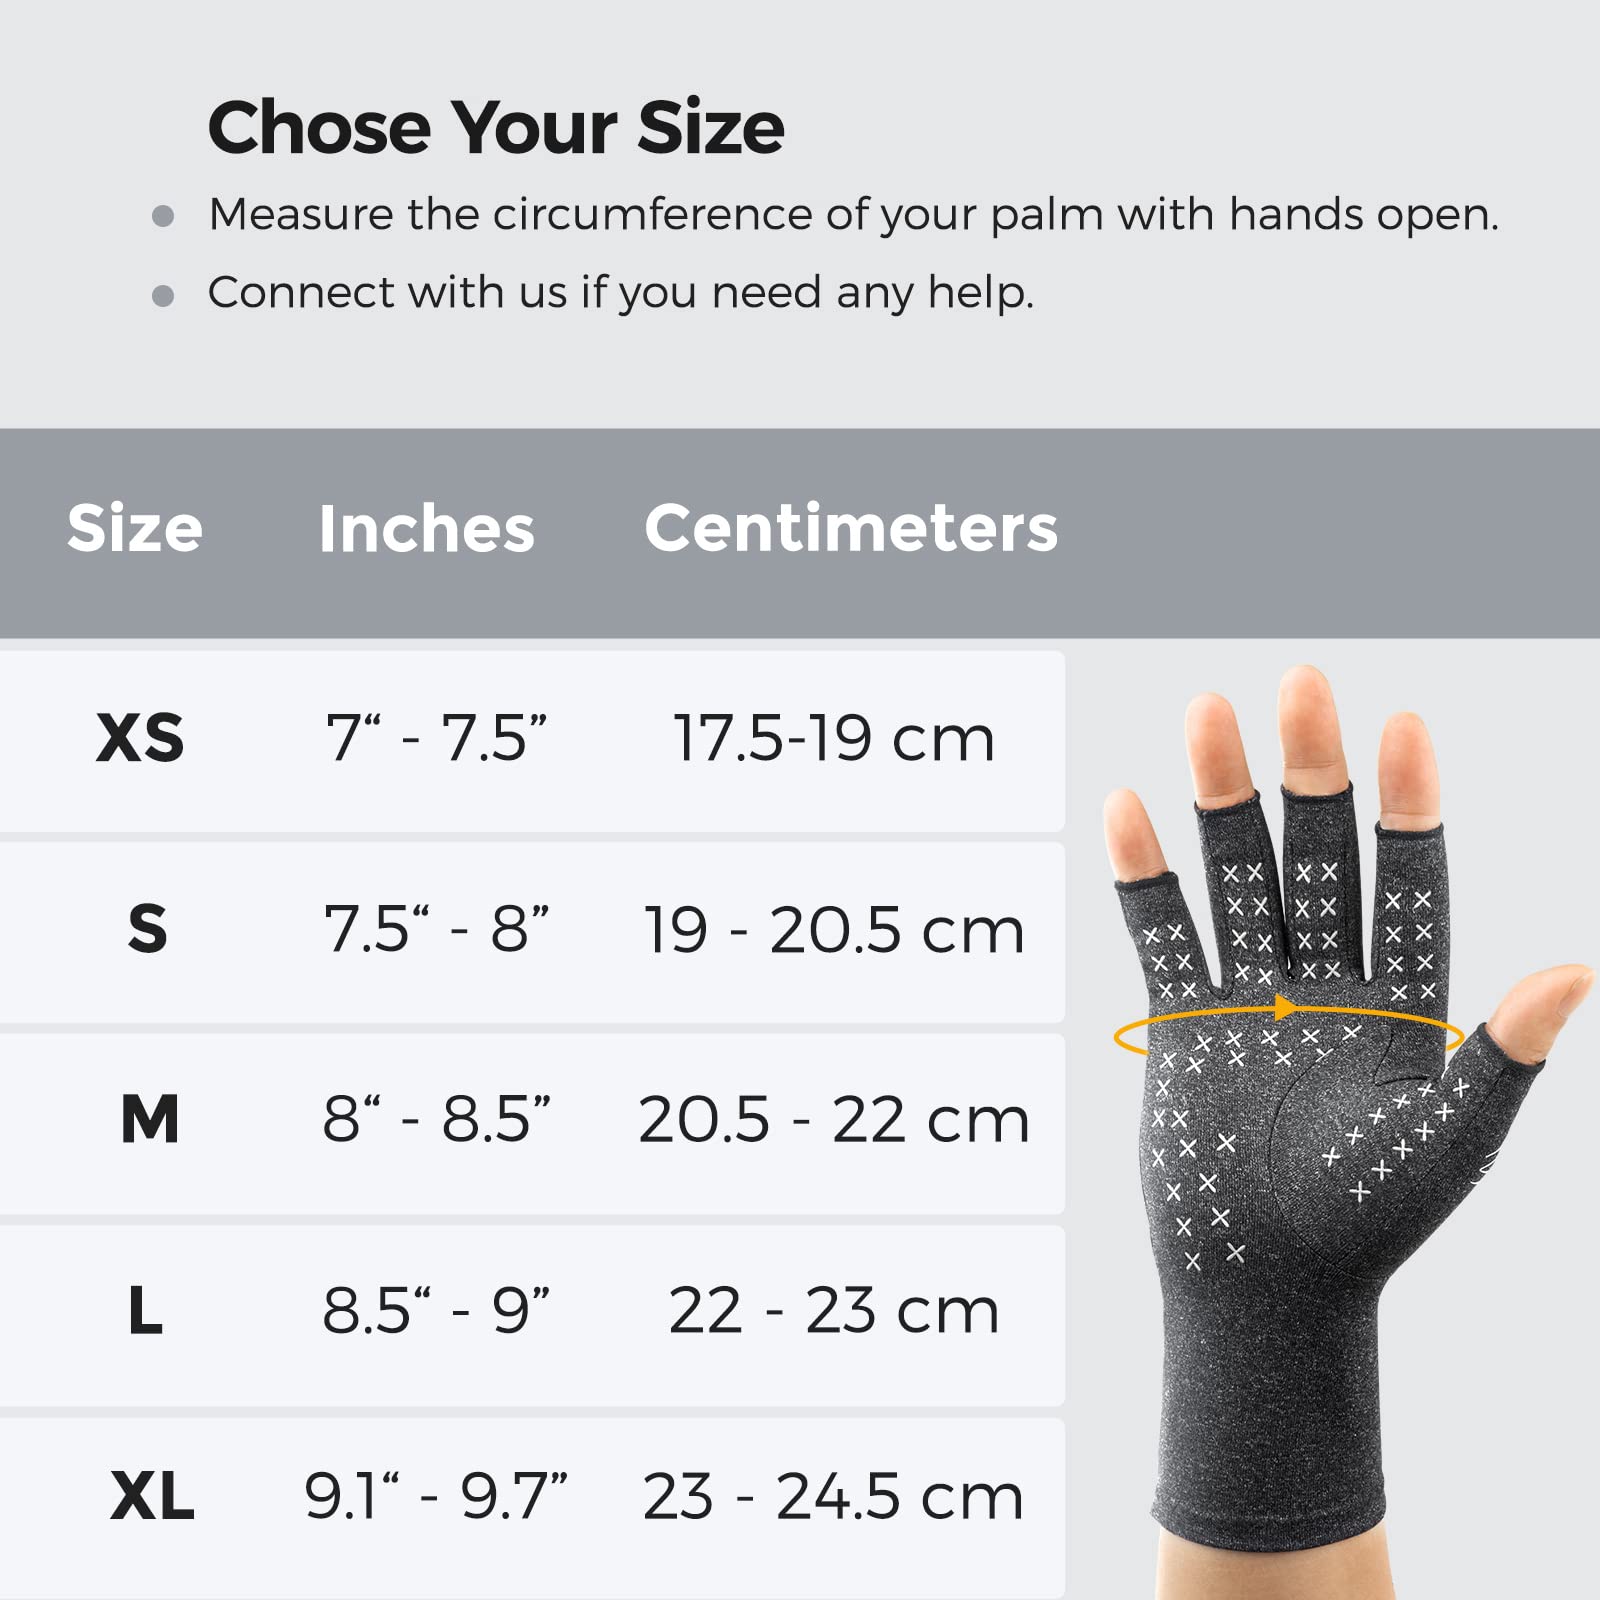 FREETOO Arthritis Gloves for Women For Pain, Strengthen Compression Gloves to Alleviate Carpal Tunnel, Rheumatoid, Tendonitis, Long Coverage Fingerless Gloves for Hand Pains, Swelling, Typing for Men